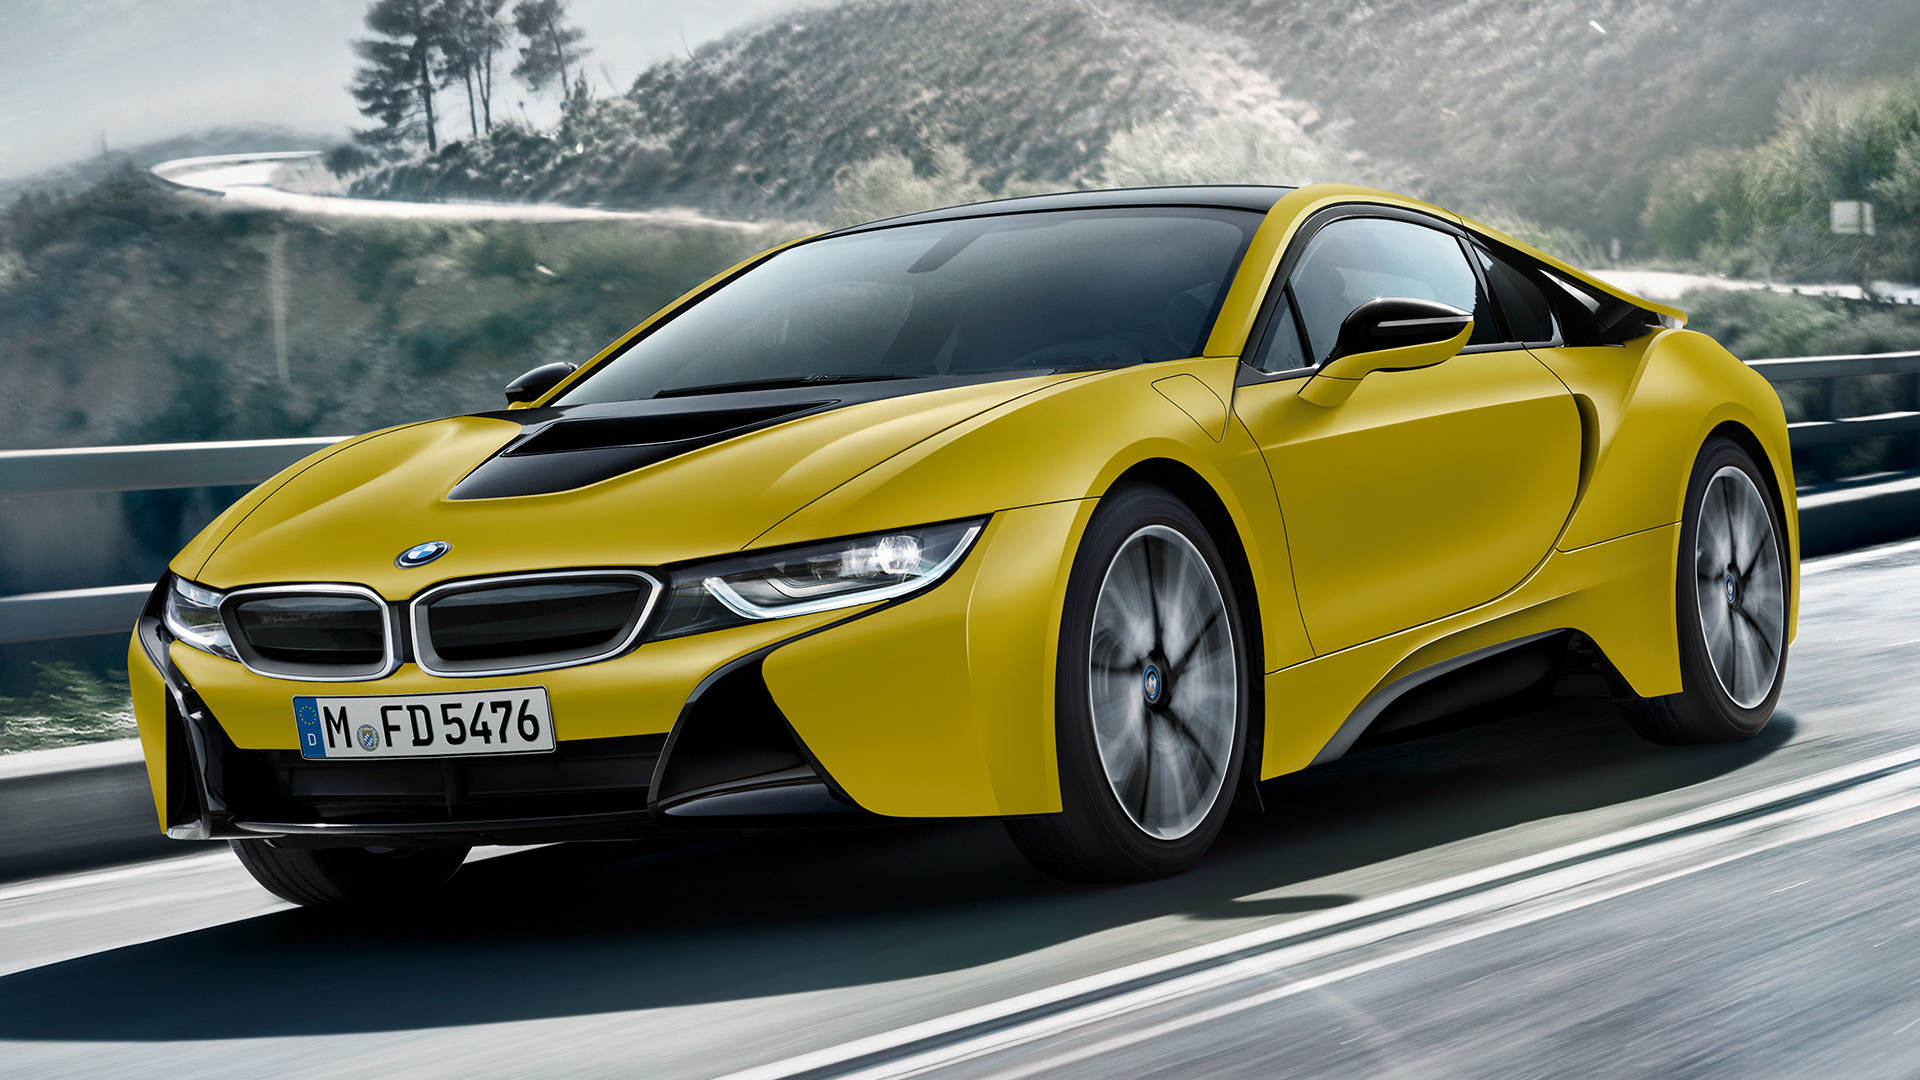 2018 BMW i8 Protonic Frozen Yellow, Exotic wallpapers, Exceptional performance, Rare beauty, Innovative design, 1920x1080 Full HD Desktop